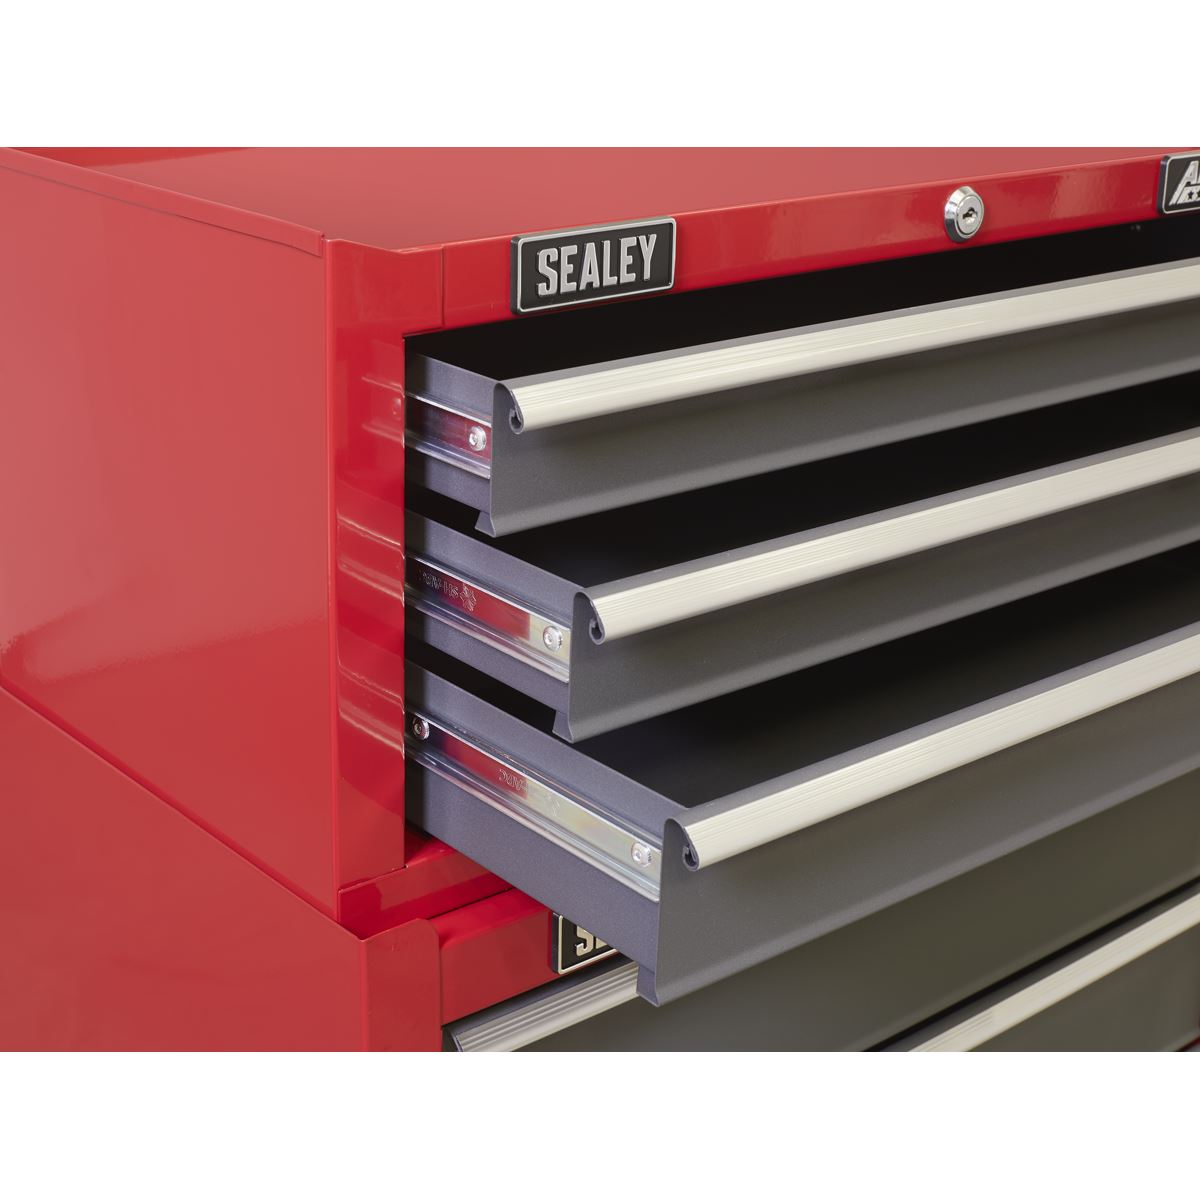 Sealey American Pro Mid-Box Tool Chest 3 Drawer with Ball-Bearing Slides - Red/Grey